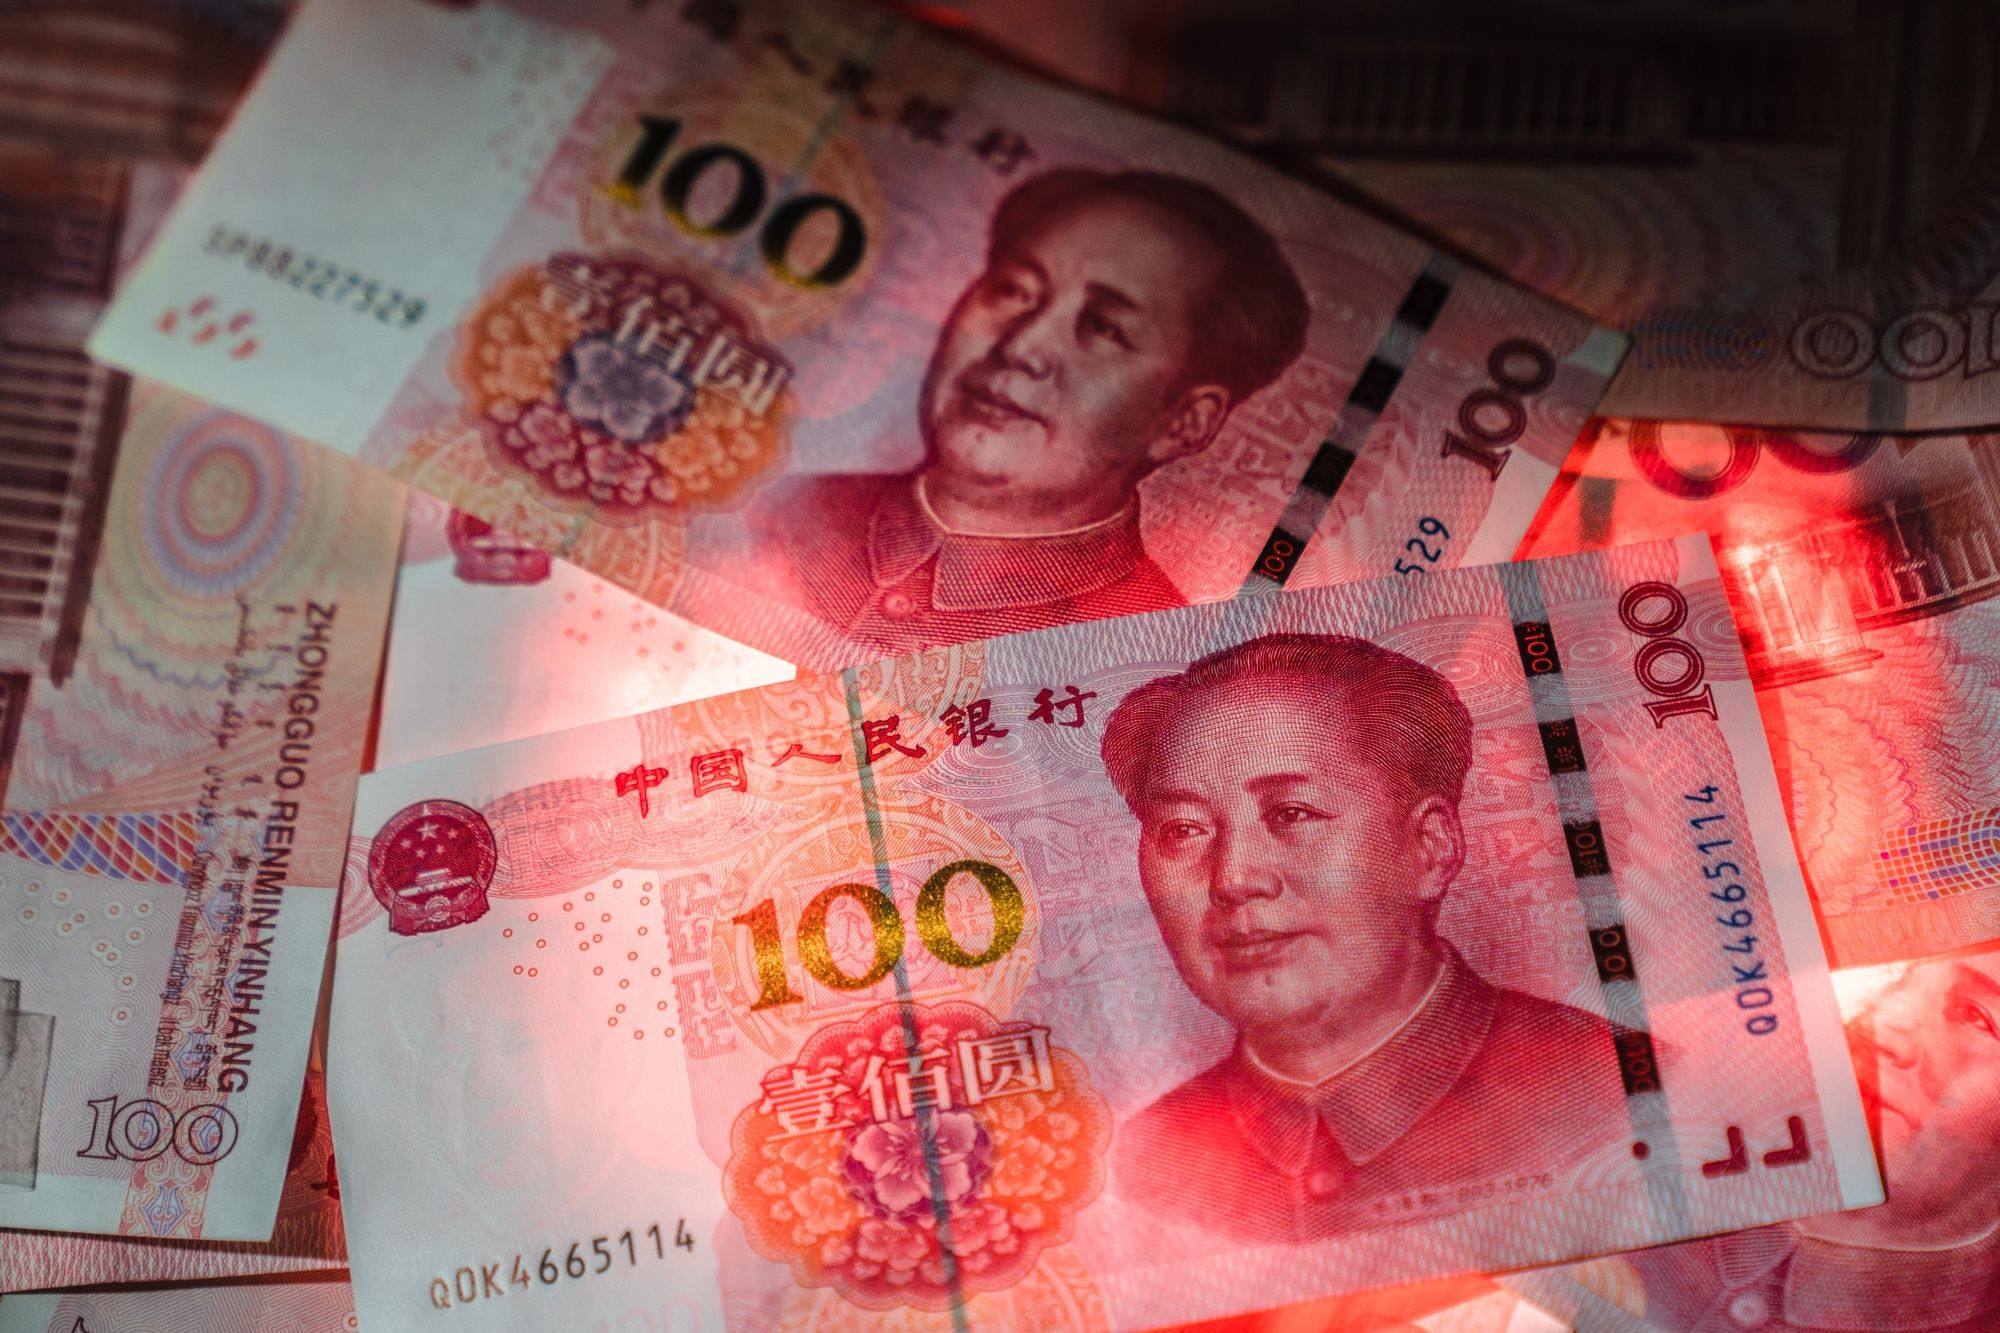 Beijing is trying to get more trade partners to settle payments in the yuan, but some are unwilling to make the switch from US dollars. Photo: Bloomberg